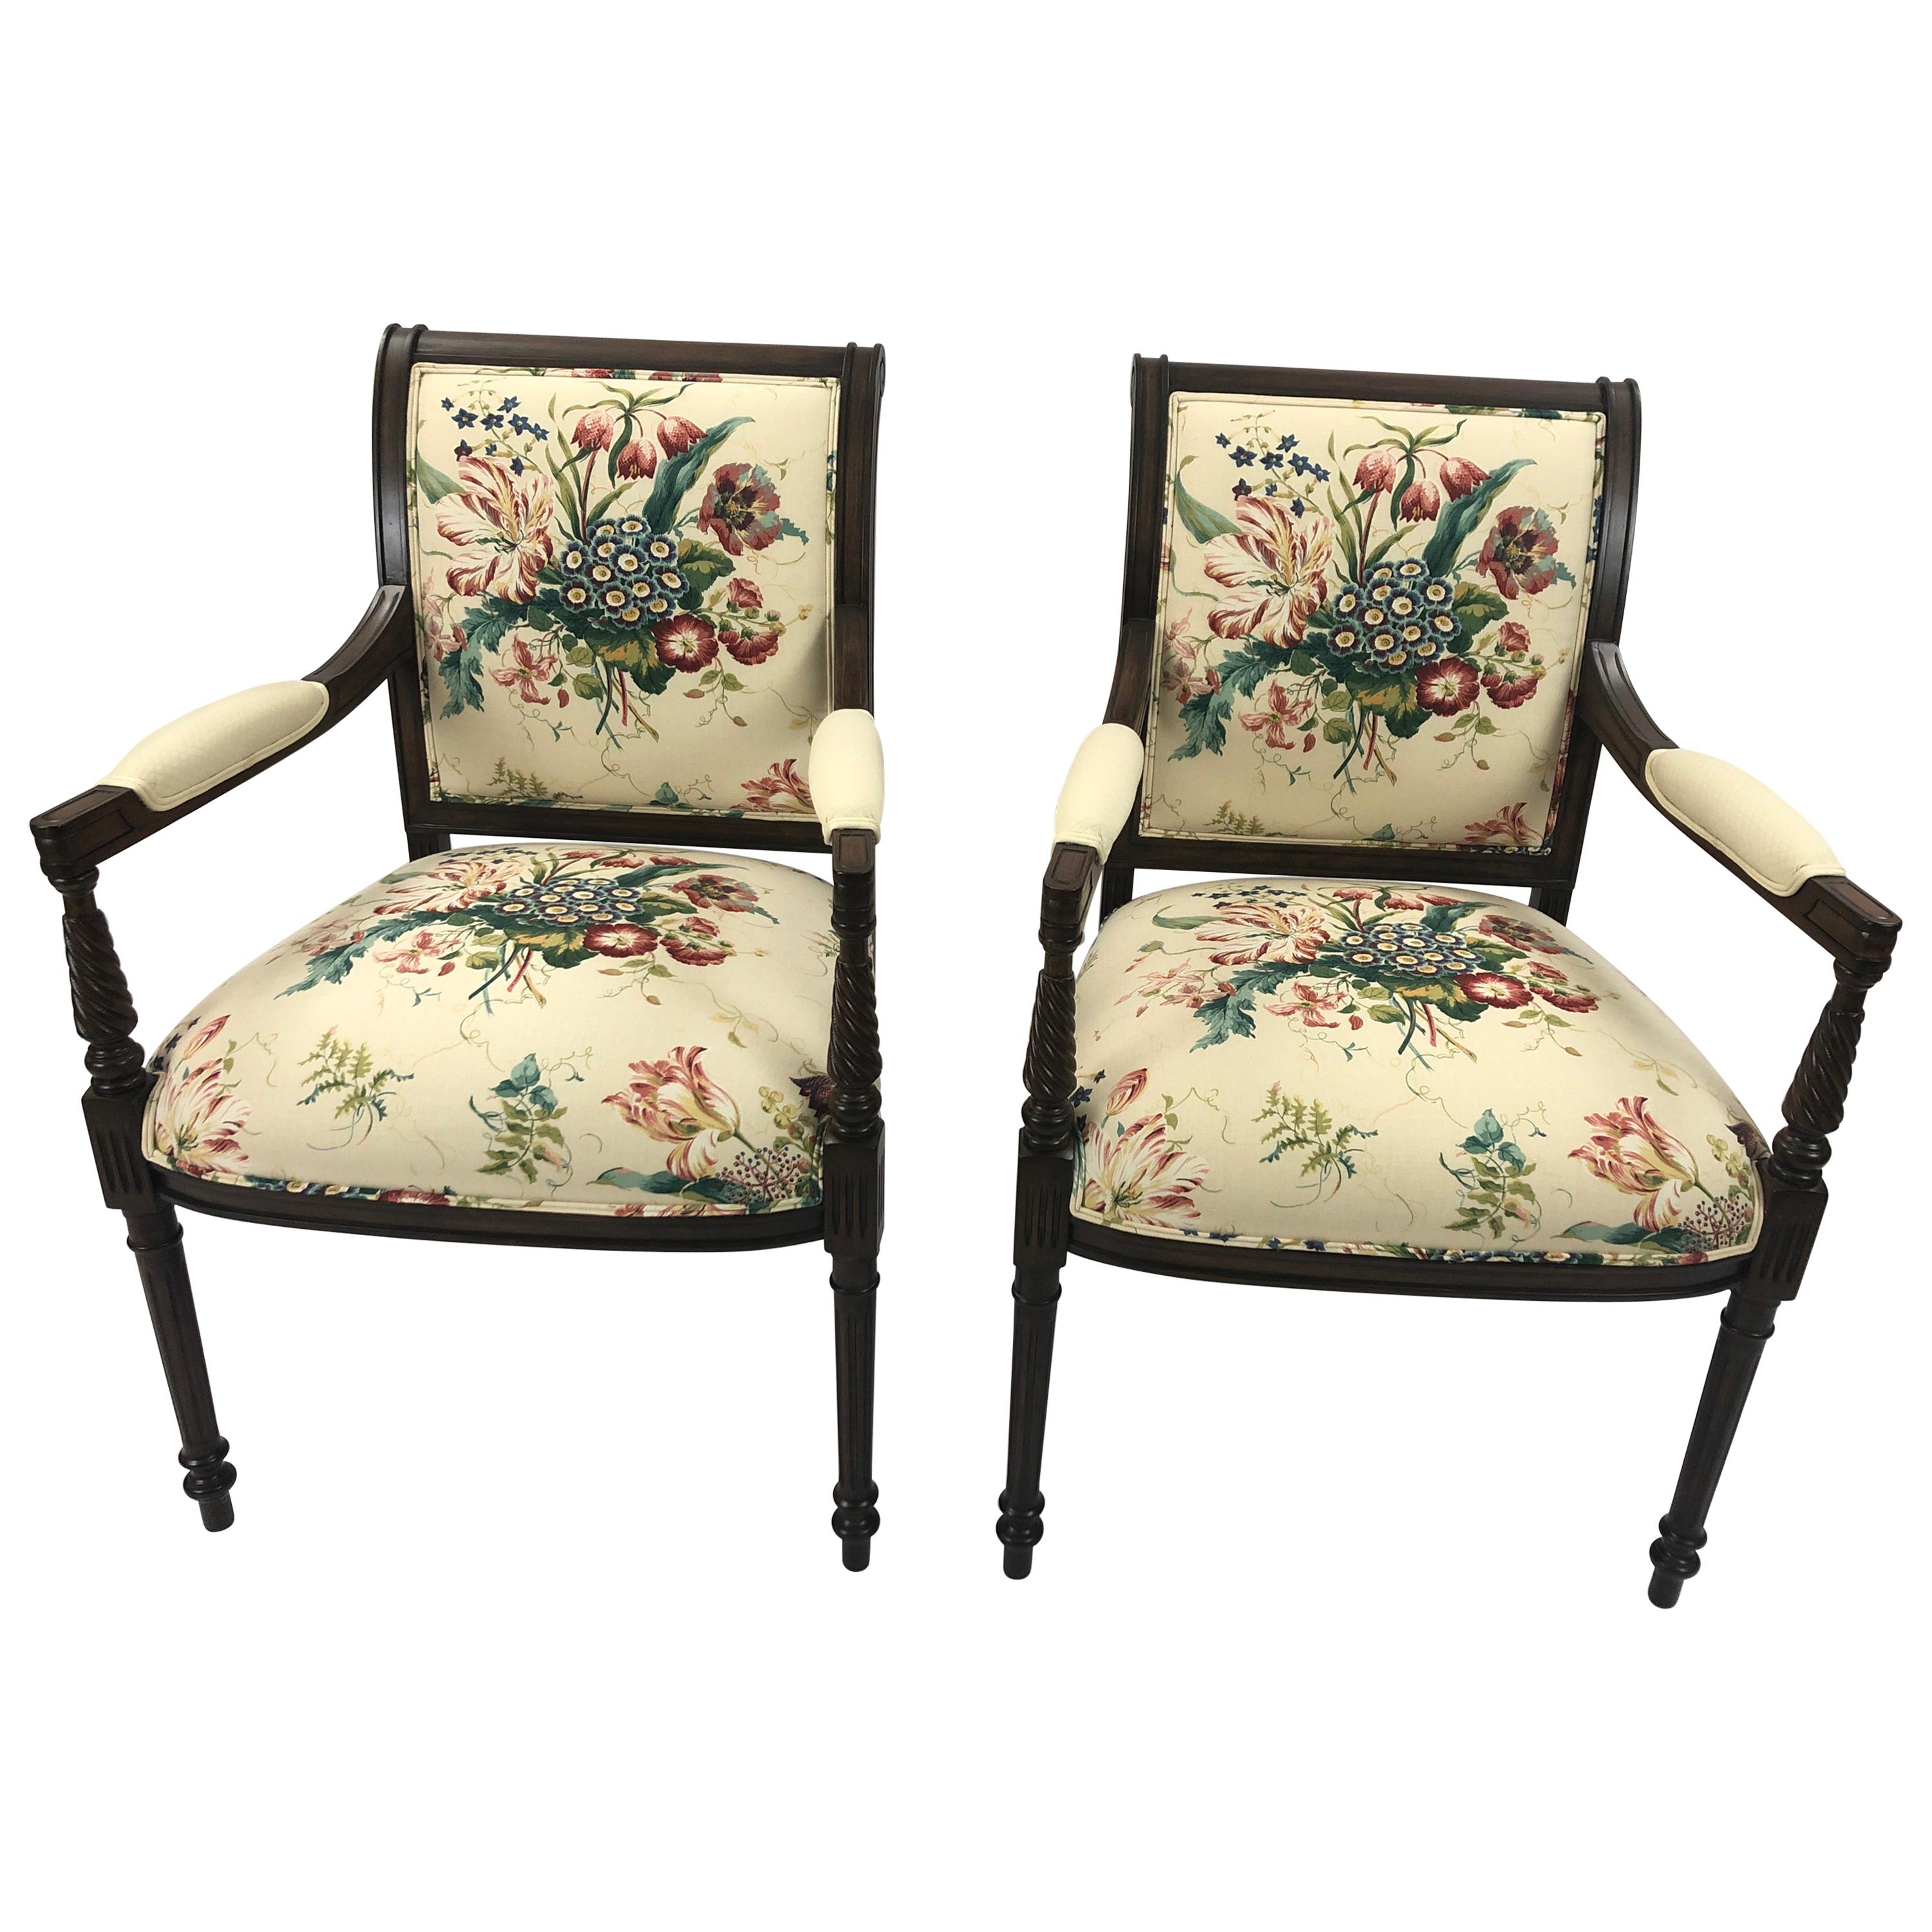 Pair of Elegant Floral Upholstered Fruitwood Armchairs